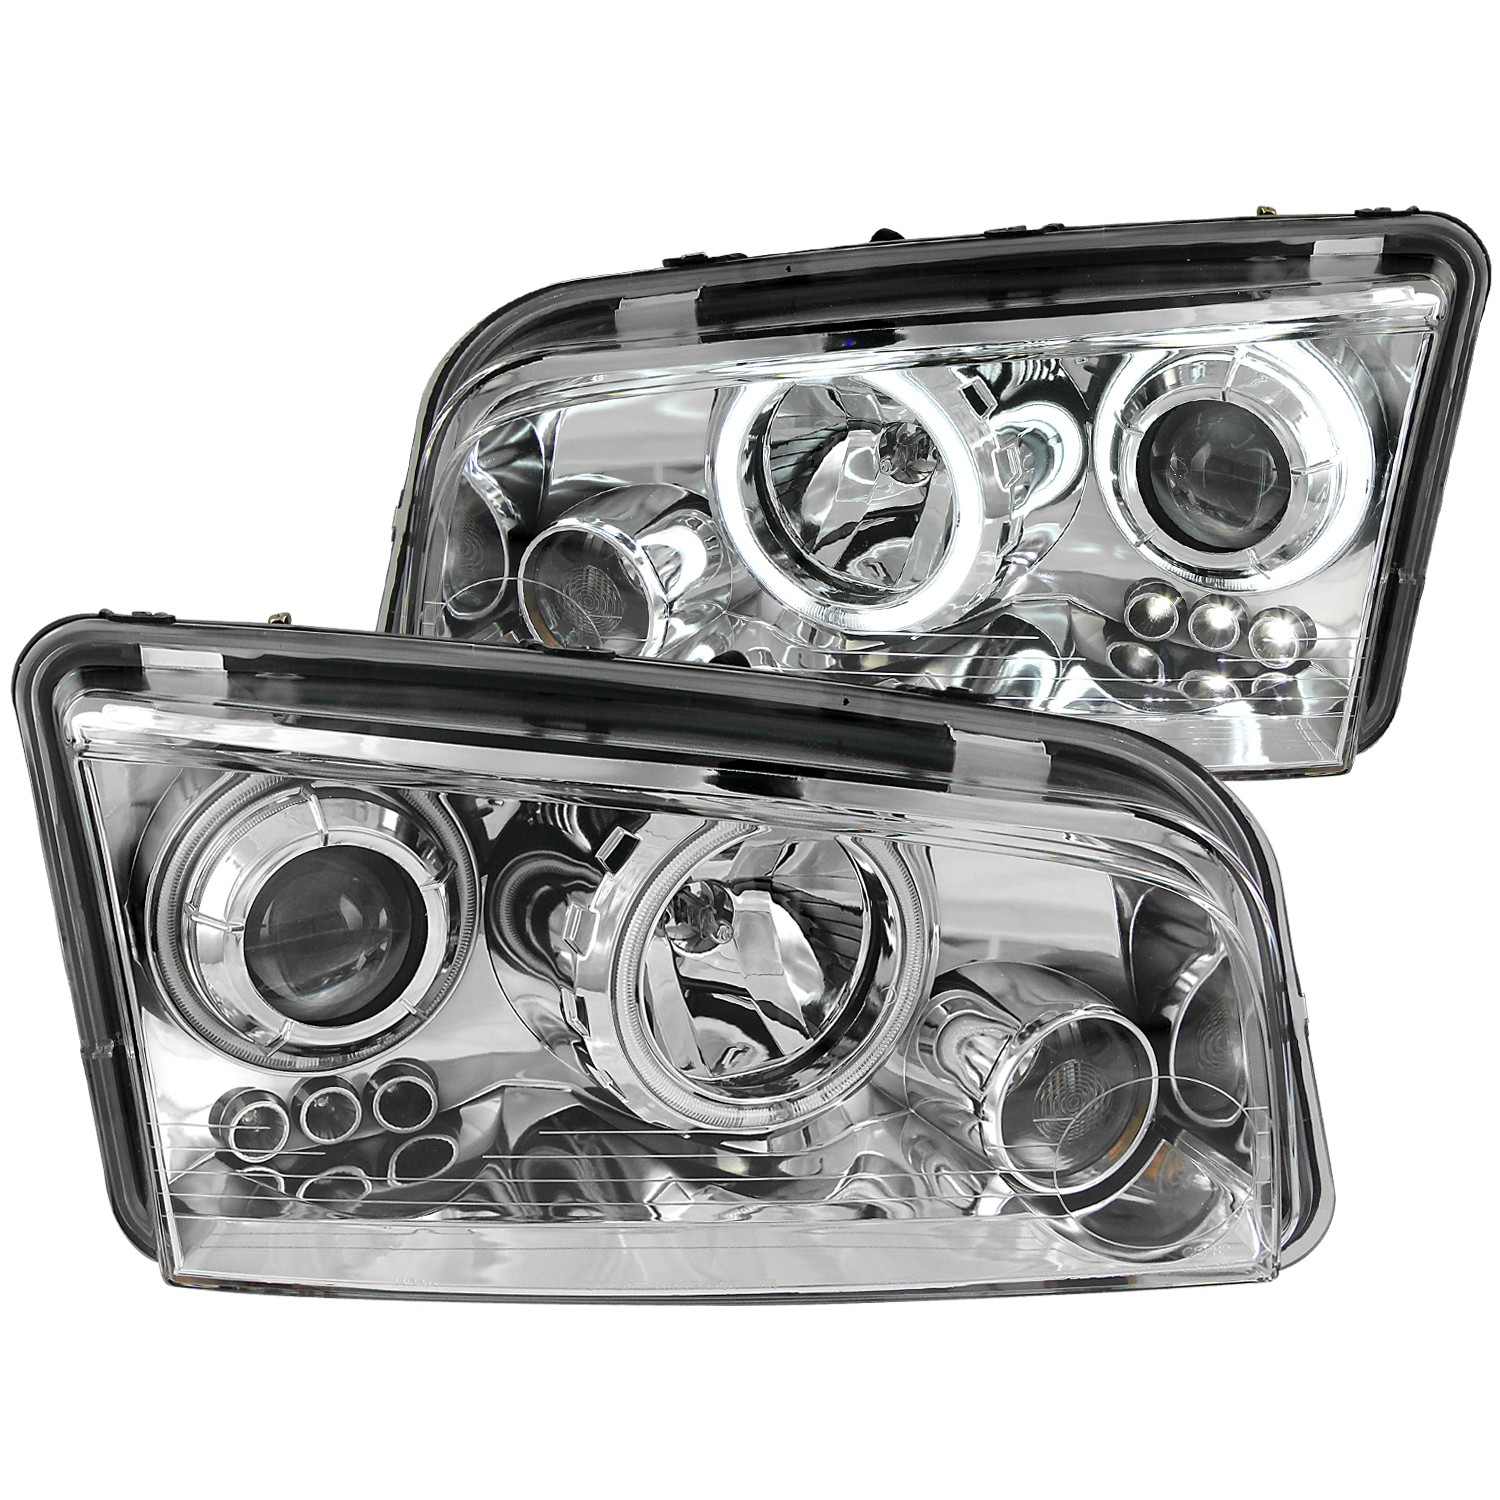 2006-2010 Dodge Charger ANZO Project Halo Head Lights w/Halogen Bulbs, Clear Lens & Chrome Housing (CCFL)